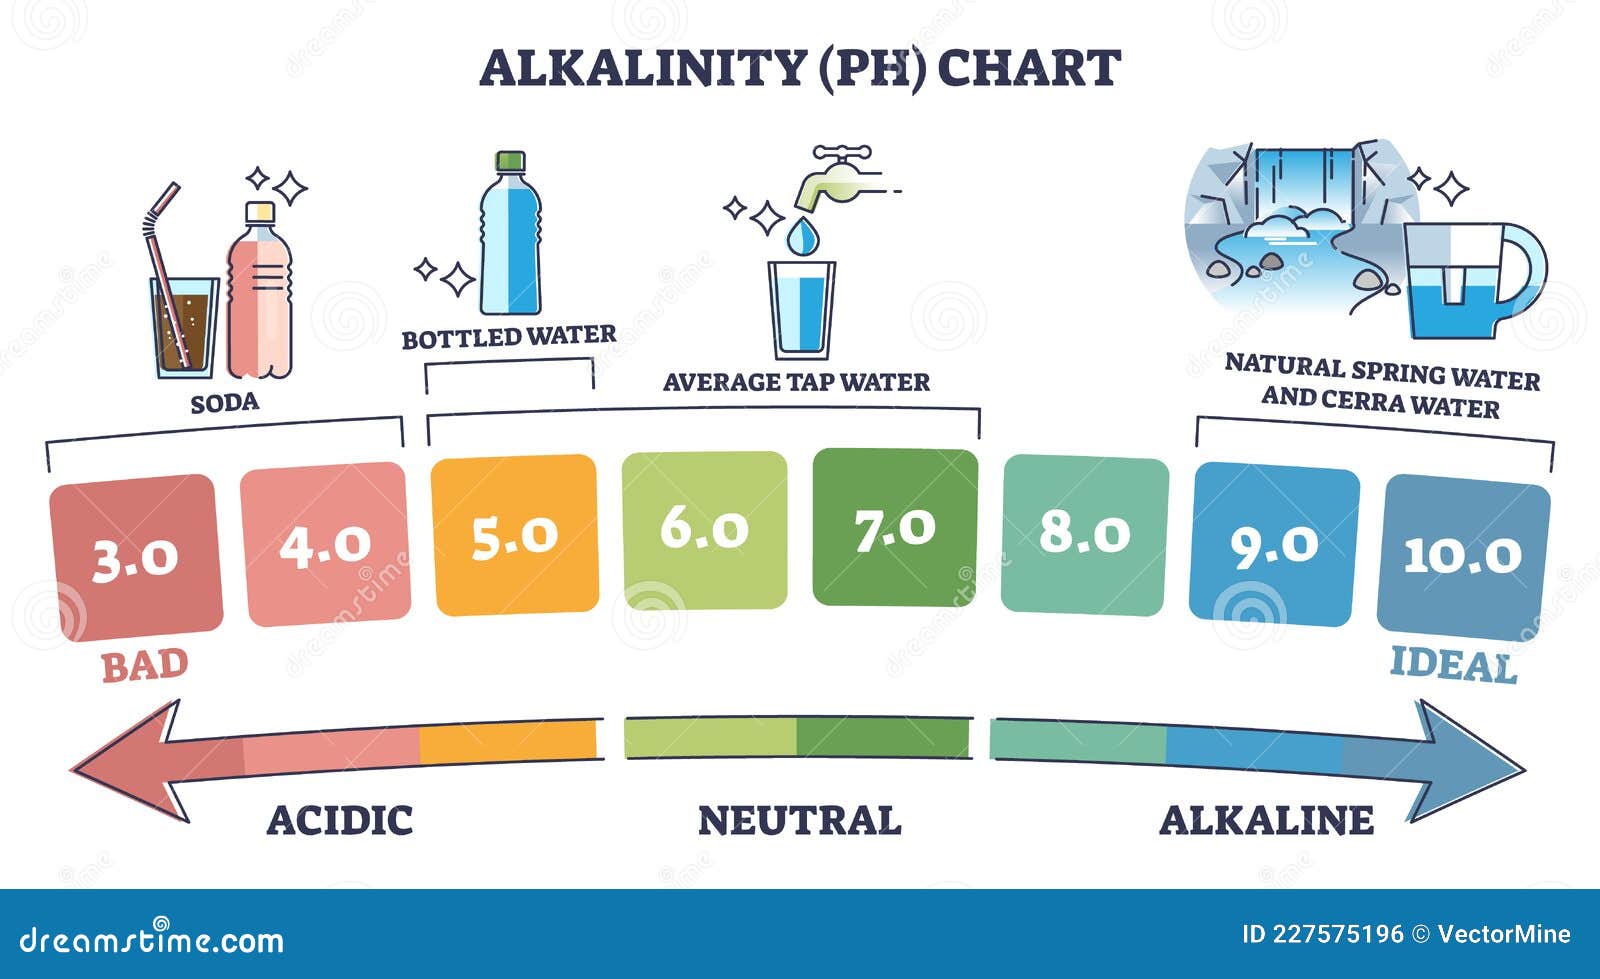 Alkalinity Ph Chart With Water Acidity From Bad To Ideal Outline Diagram Stock Vector